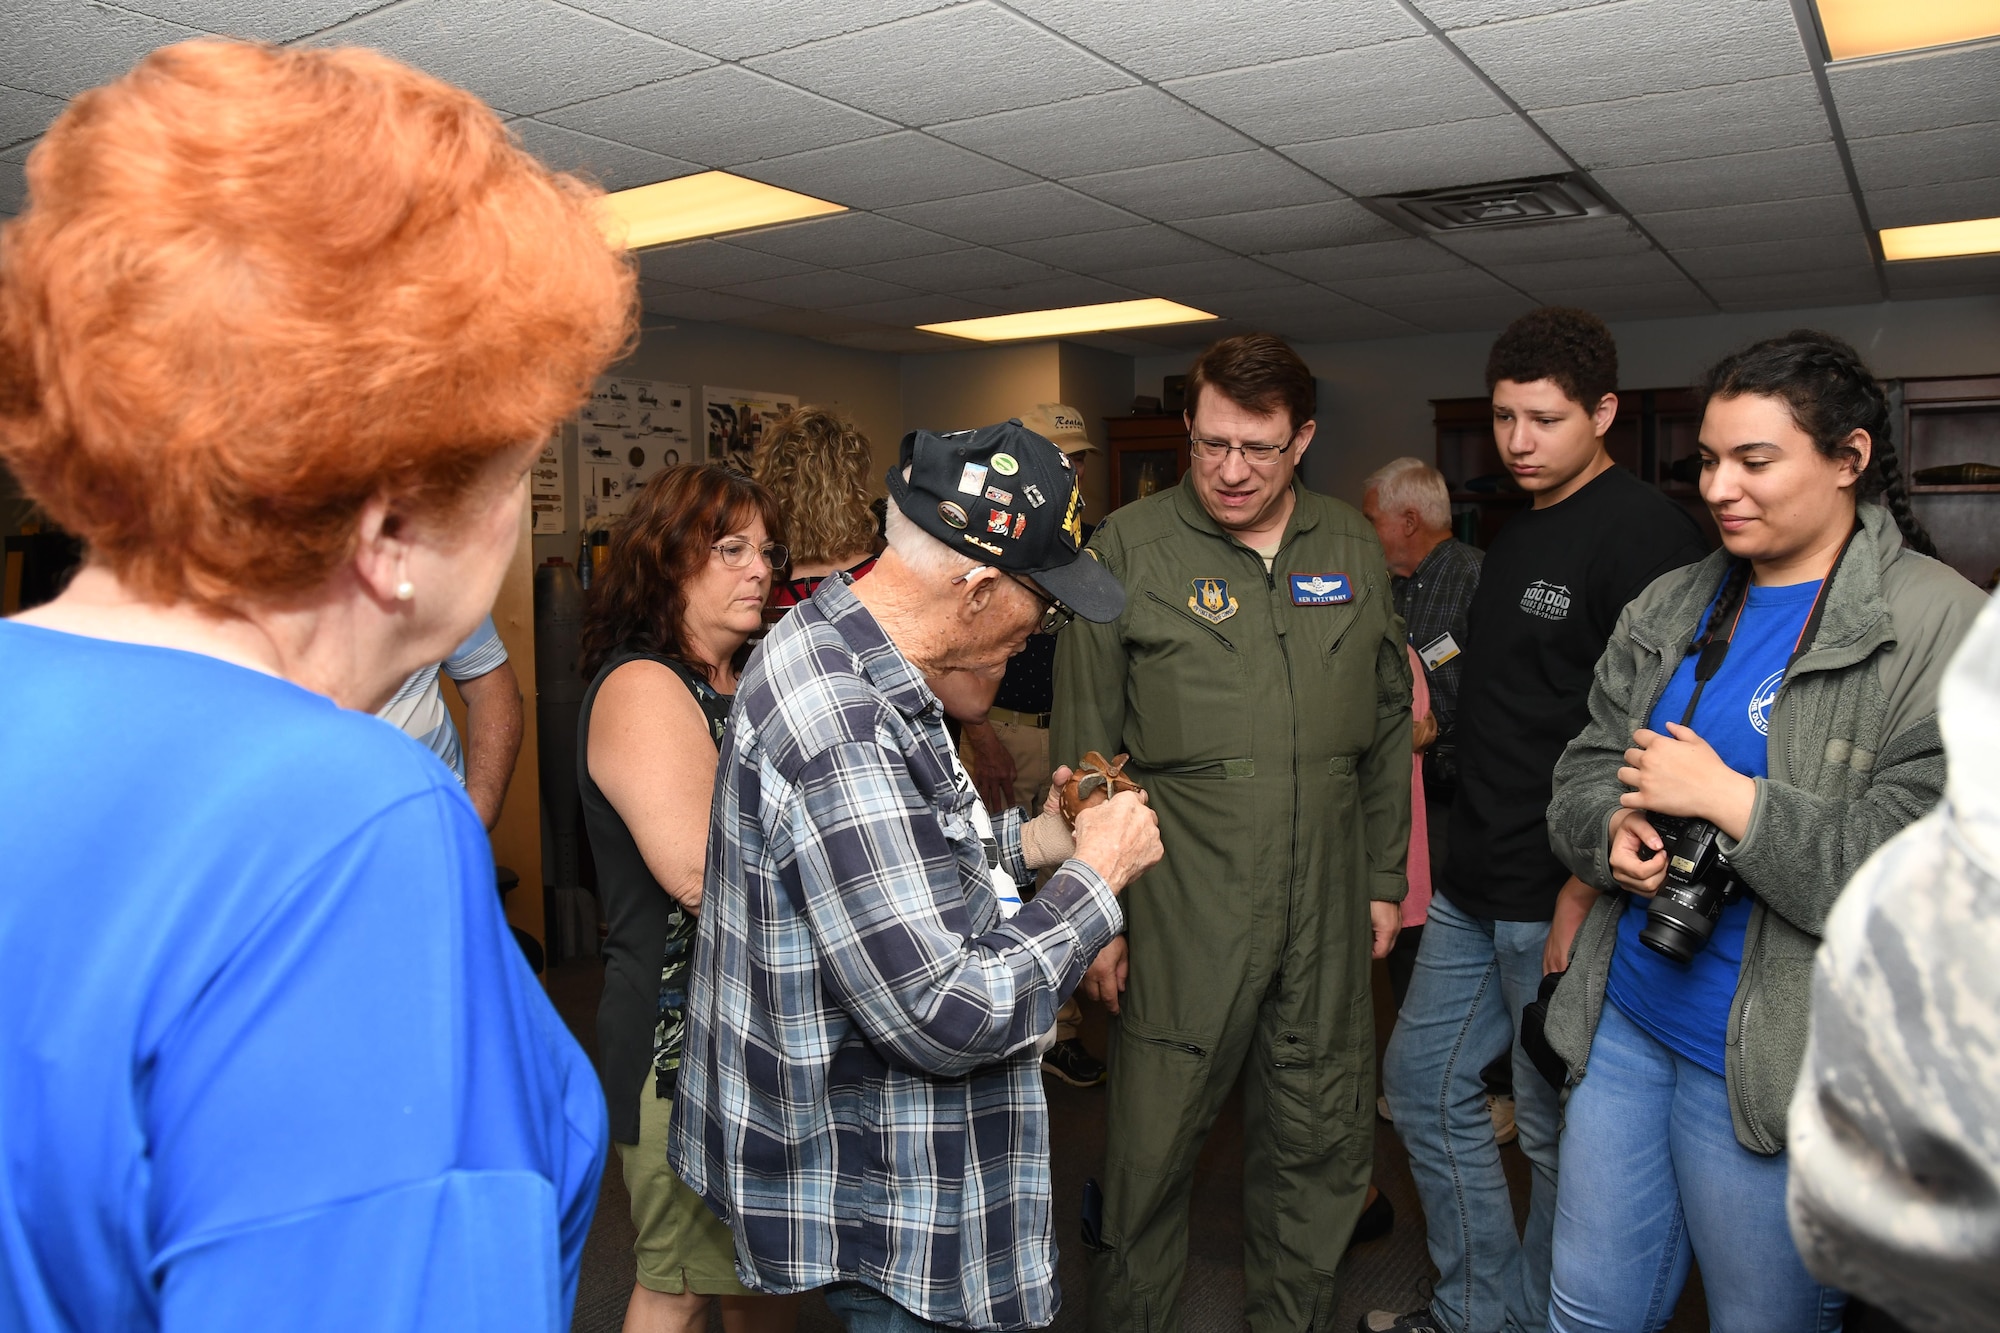 Current and former members of the 307th Bomb Wing toured the 2nd Bomb Wing’s Explosive Ordnance Disposal on Barksdale Air Force Base, La. March 31, 2017. The 307th BW hosted a reunion to celebrate the 75th anniversary of the unit and included alumni from wars such as World War II, the Korean War, Vietnam and the Cold War. (U.S. Air Force photo by Staff Sgt. Callie Ware/Released)